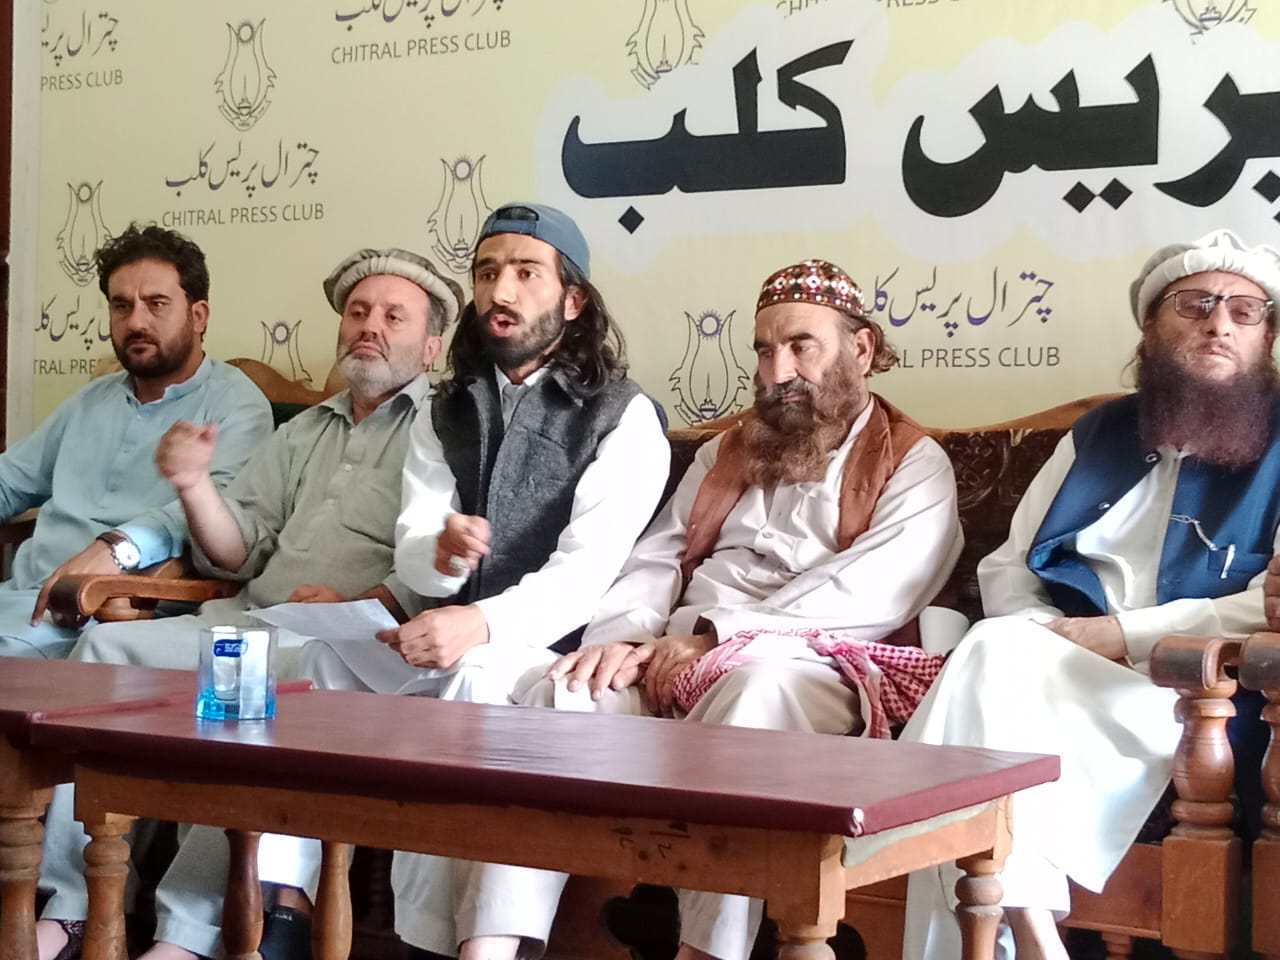 chitraltimes pir mukhtar press confrence chitral2